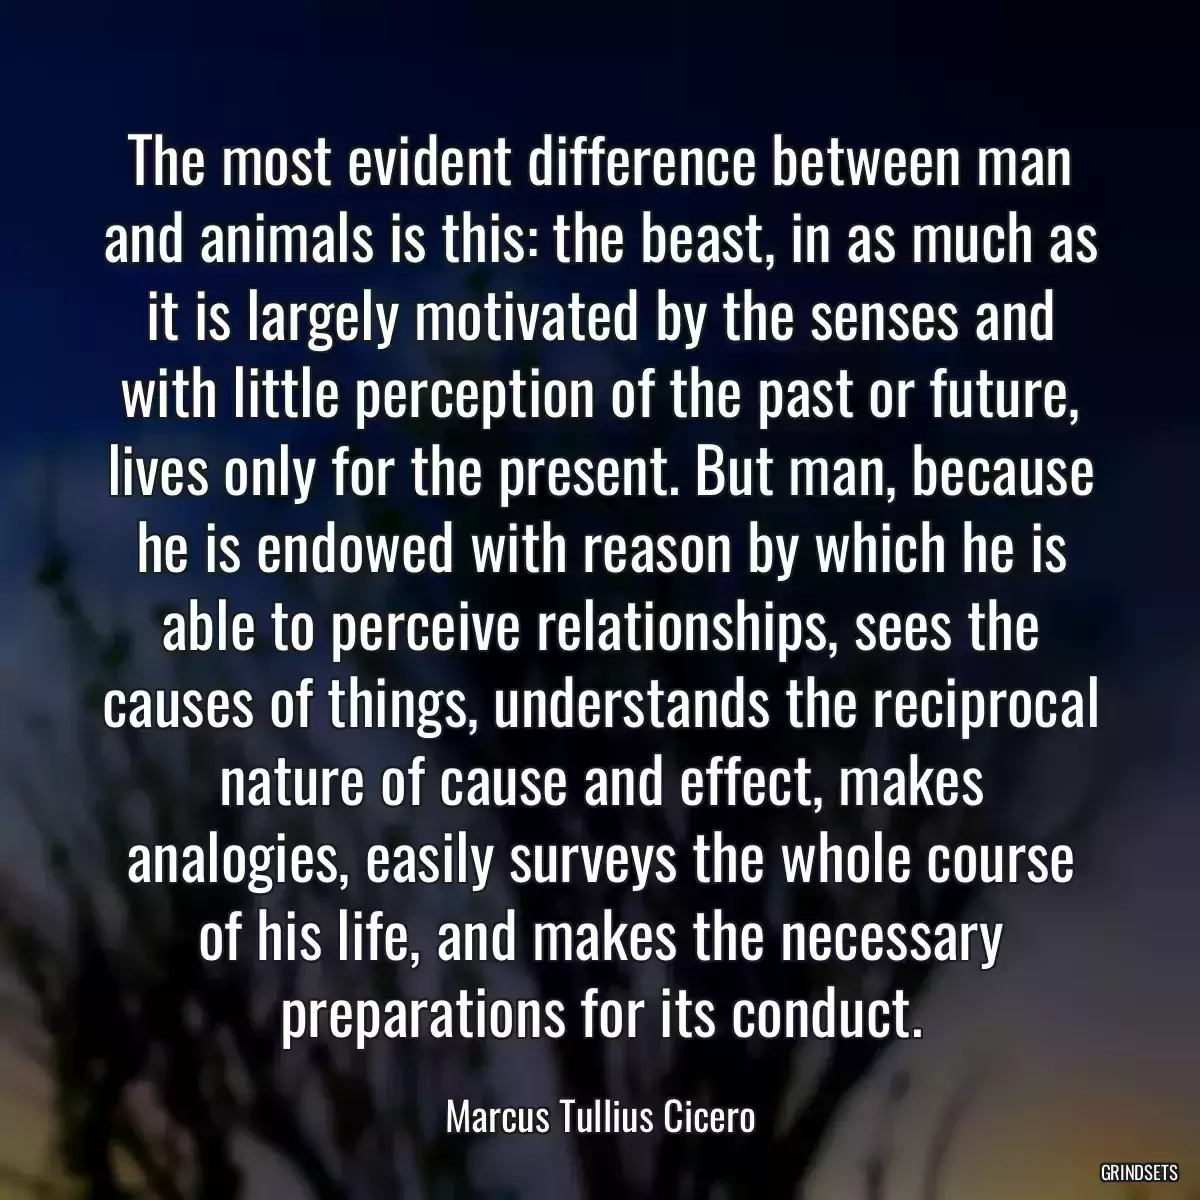 The most evident difference between man and animals is this: the beast, in as much as it is largely motivated by the senses and with little perception of the past or future, lives only for the present. But man, because he is endowed with reason by which he is able to perceive relationships, sees the causes of things, understands the reciprocal nature of cause and effect, makes analogies, easily surveys the whole course of his life, and makes the necessary preparations for its conduct.